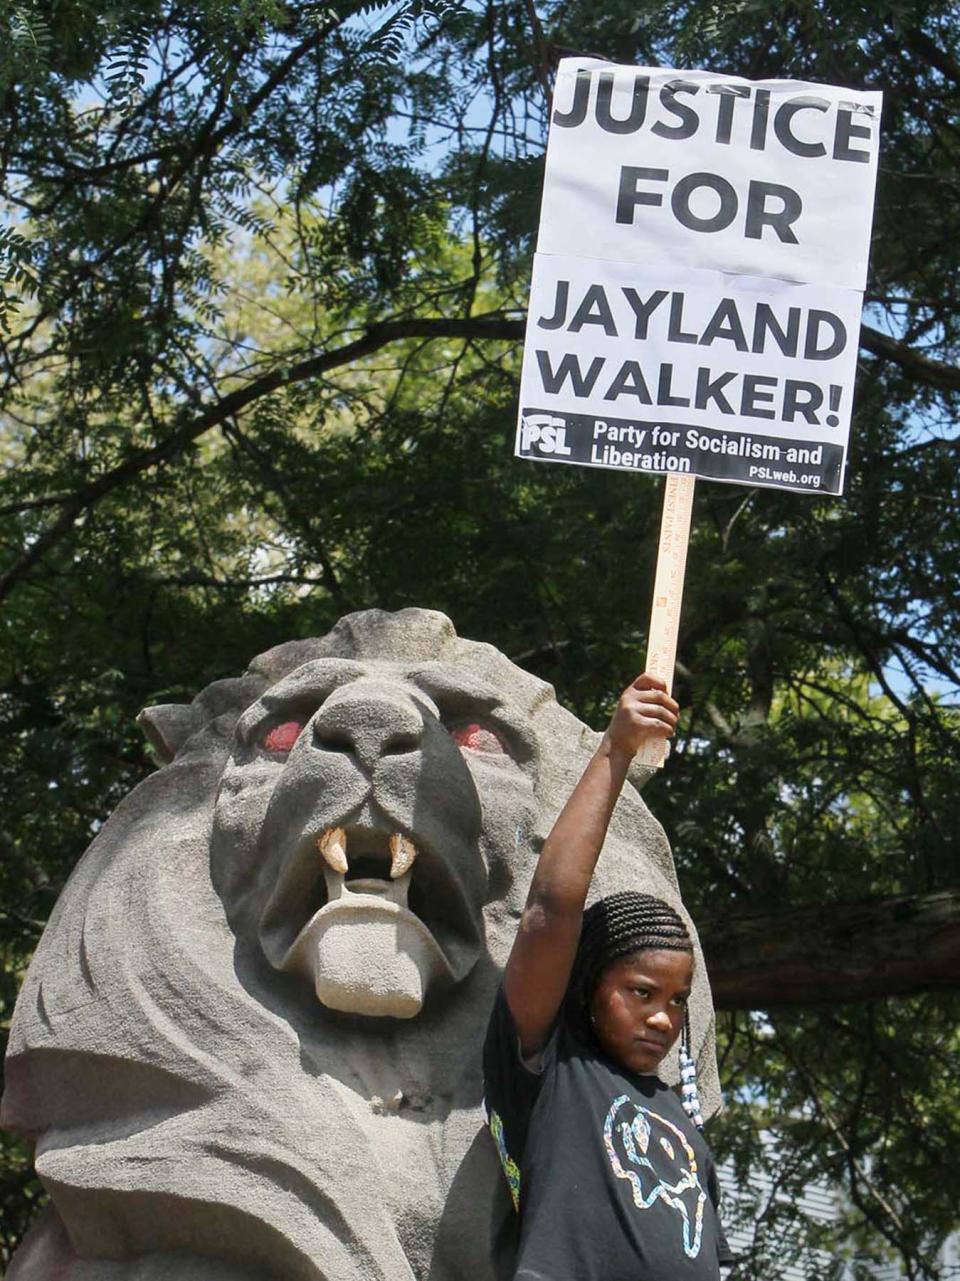 A young activist holds a sign in front of one of the lions at the Summit County Courthouse during a protest of the police shooting of Jayland Walker organized by the Party for Socialism and Liberation on July 9, 2022, in Akron. (Karen Schiely, Akron Beacon Journal)